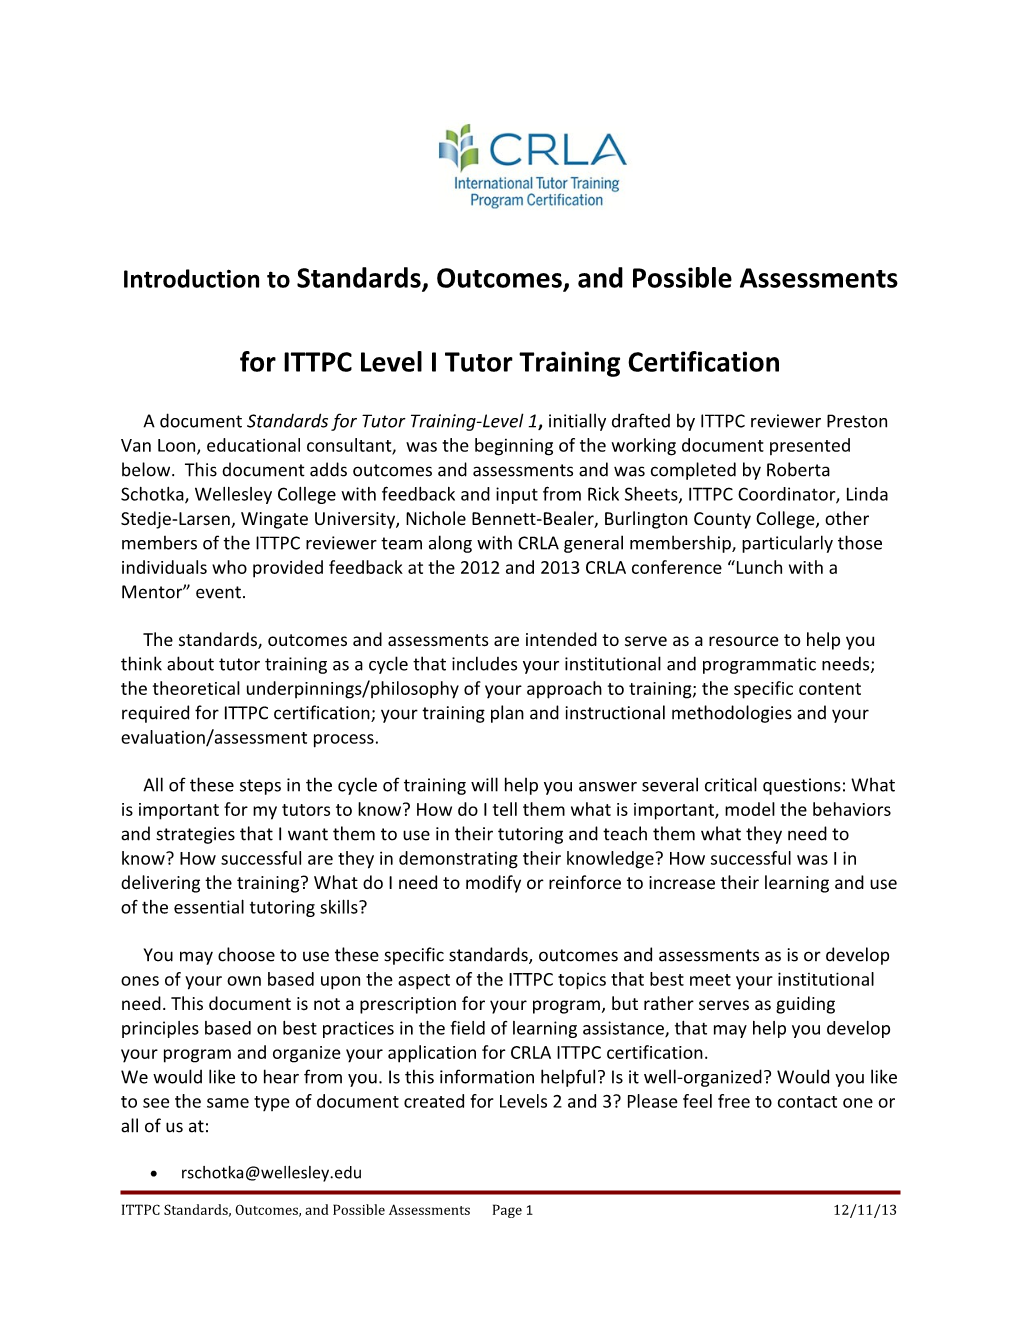 Introduction to Standards, Outcomes, and Possibleassessments for ITTPC Level I Tutor Training